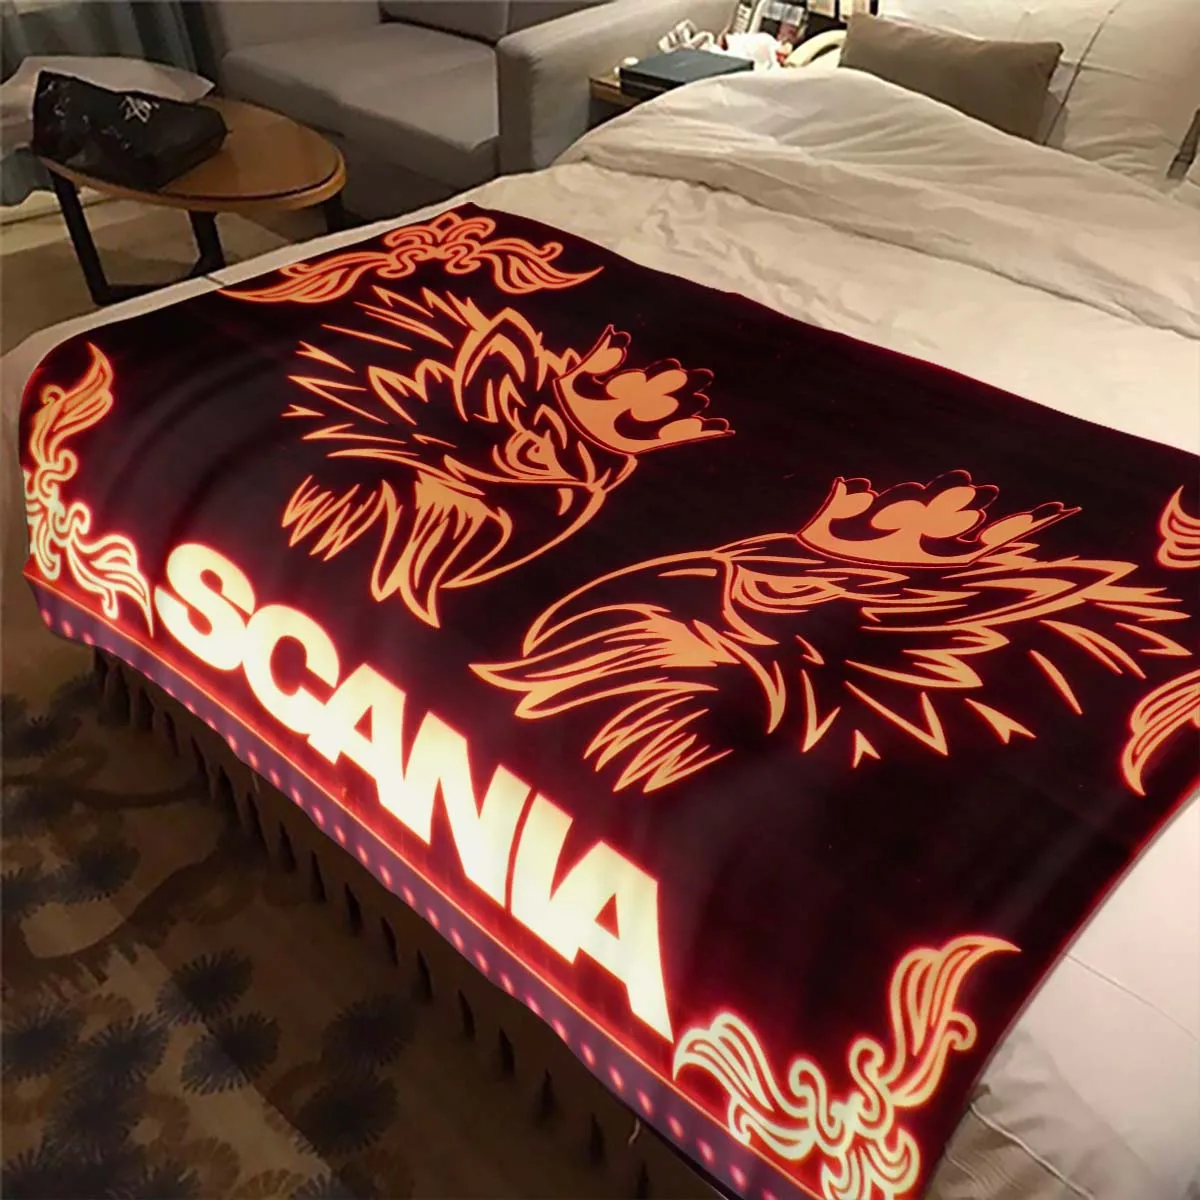 Scania Truck Logo Print Flannel Blanket Cool Truck Lightweight Soft Fleece Blanket Bedspread Sofa Couch Camping Traveling Cover